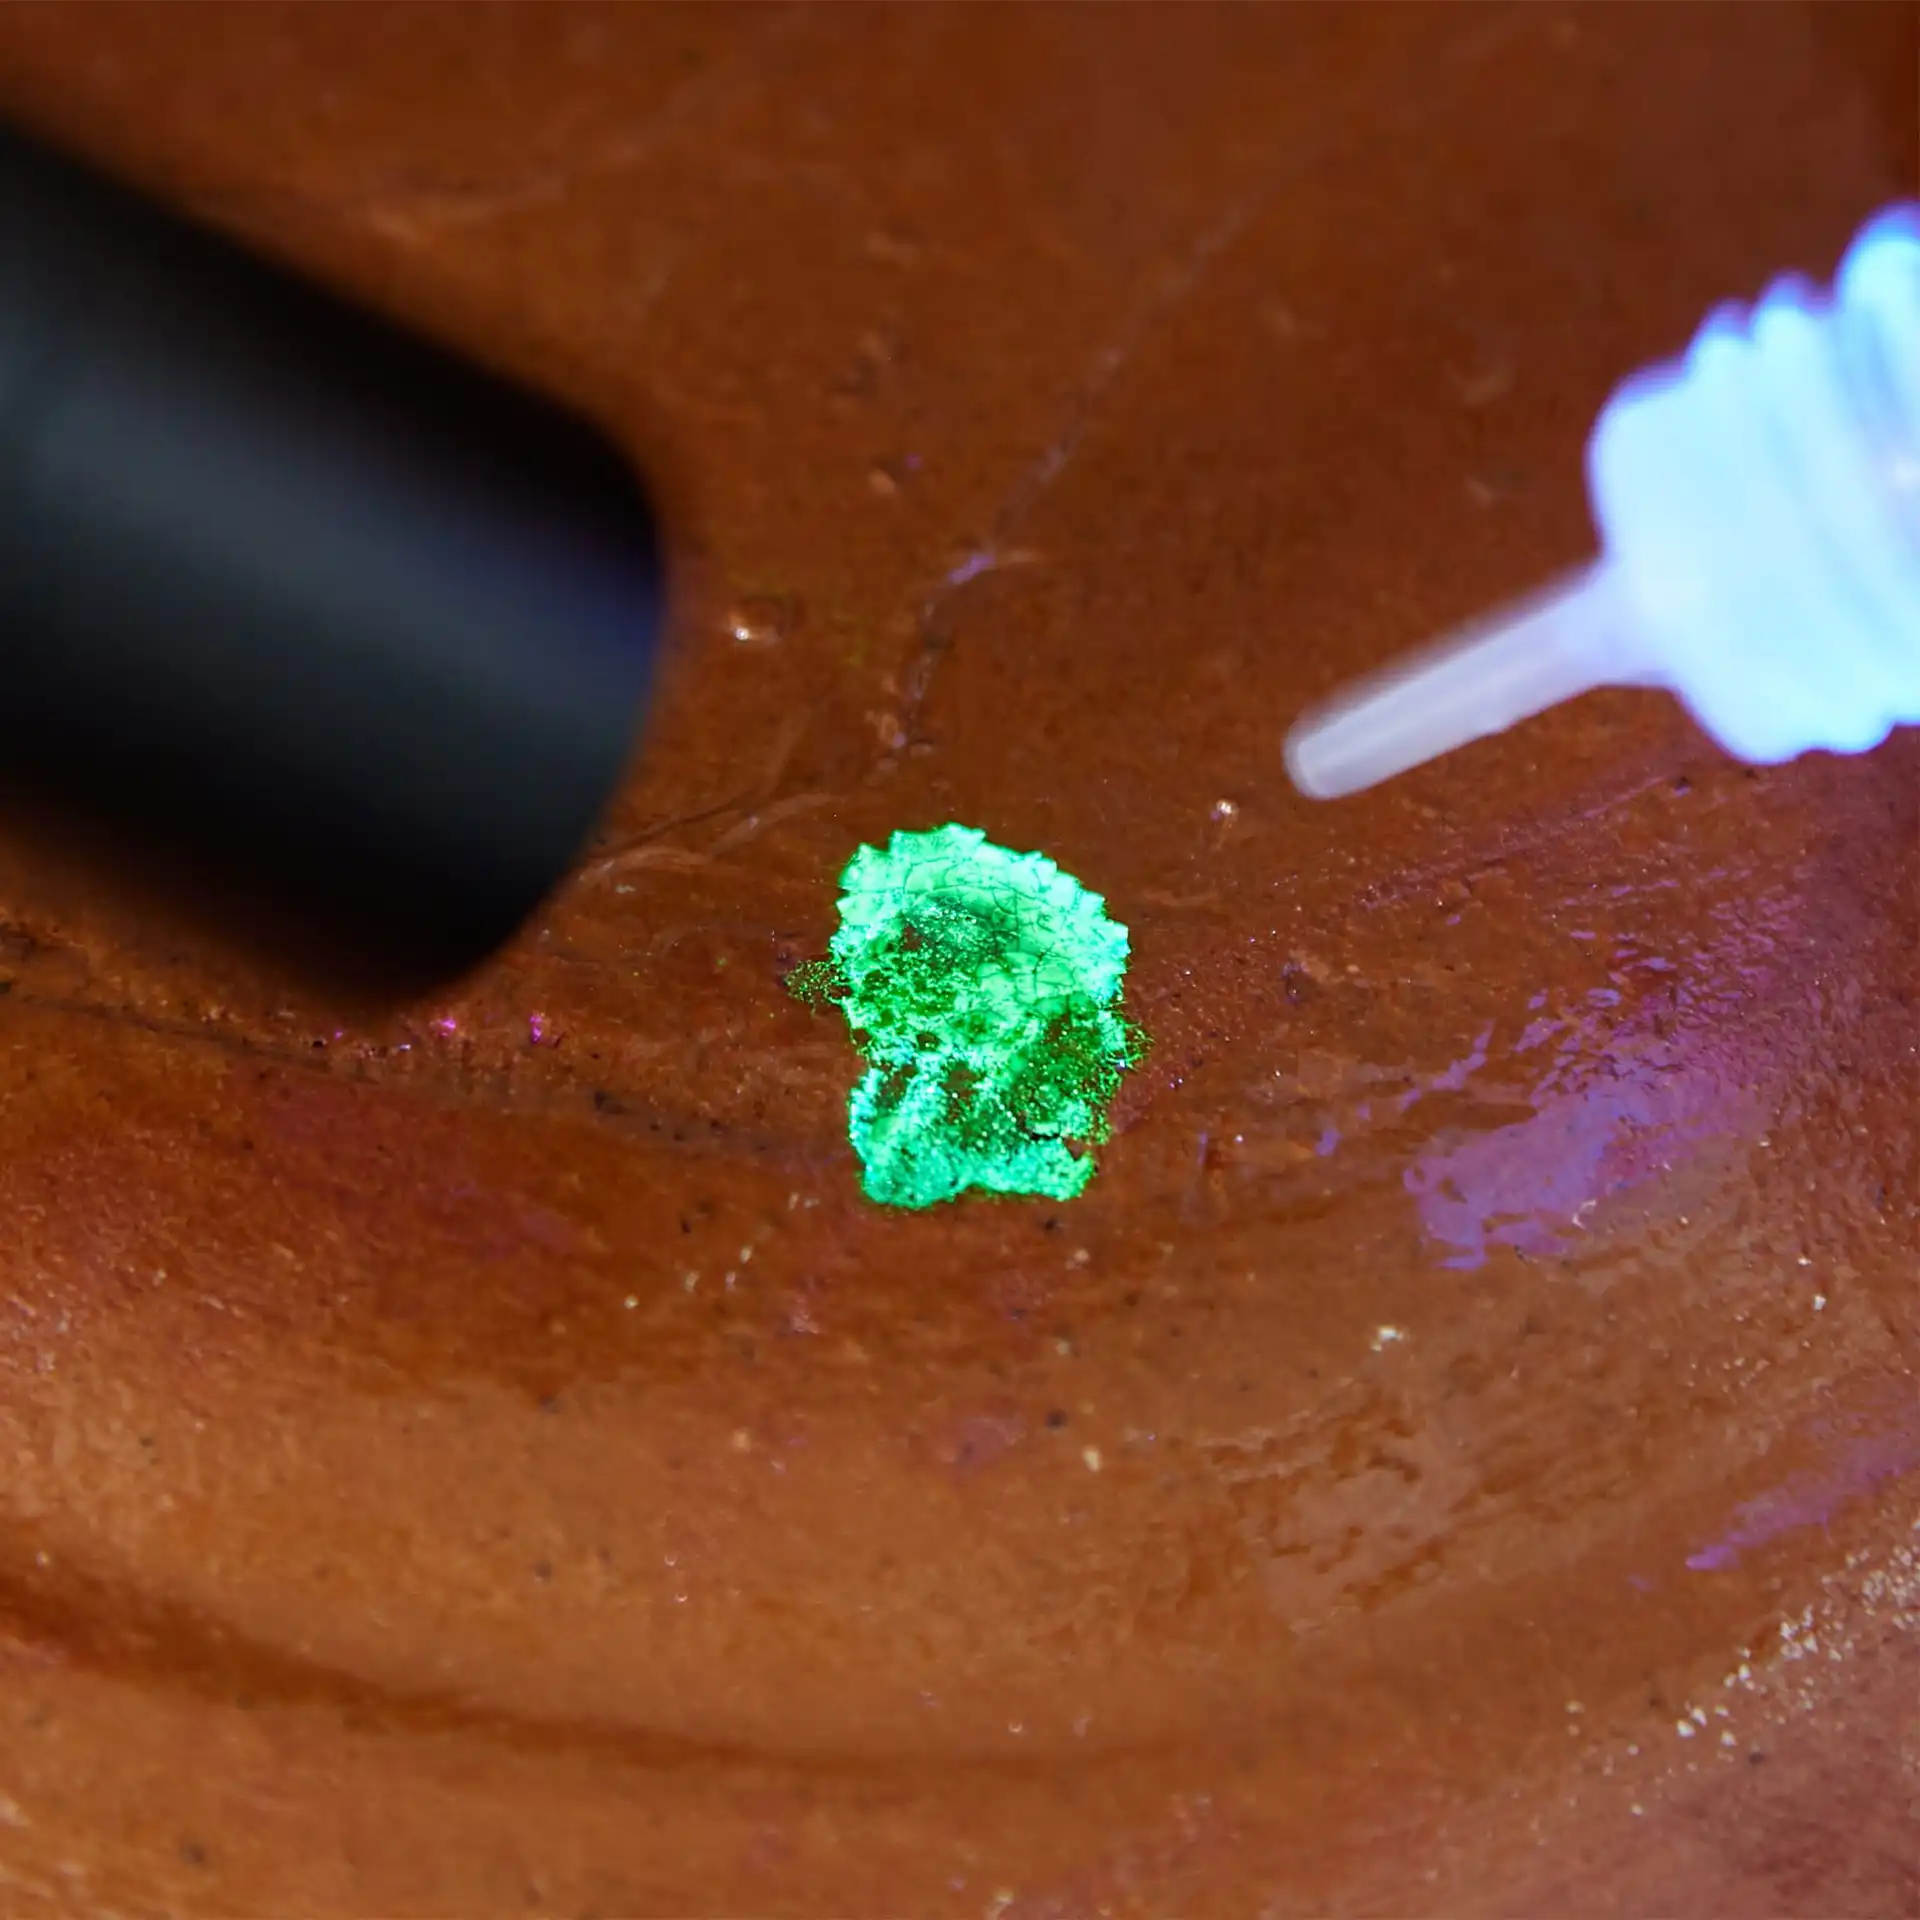 A close up view of a drop Reagent on a ceramic bowl